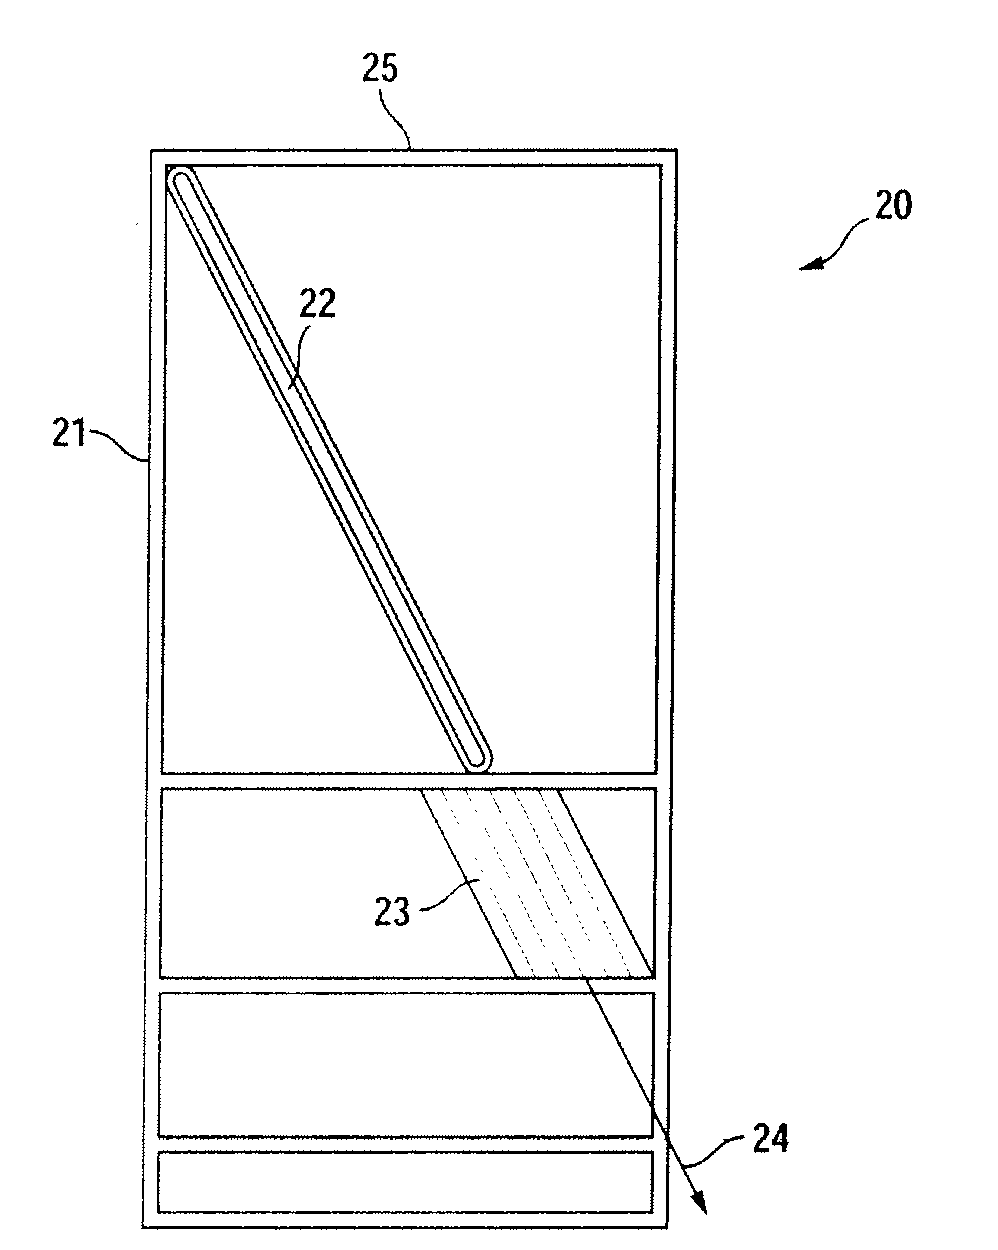 Data center cooling device and method